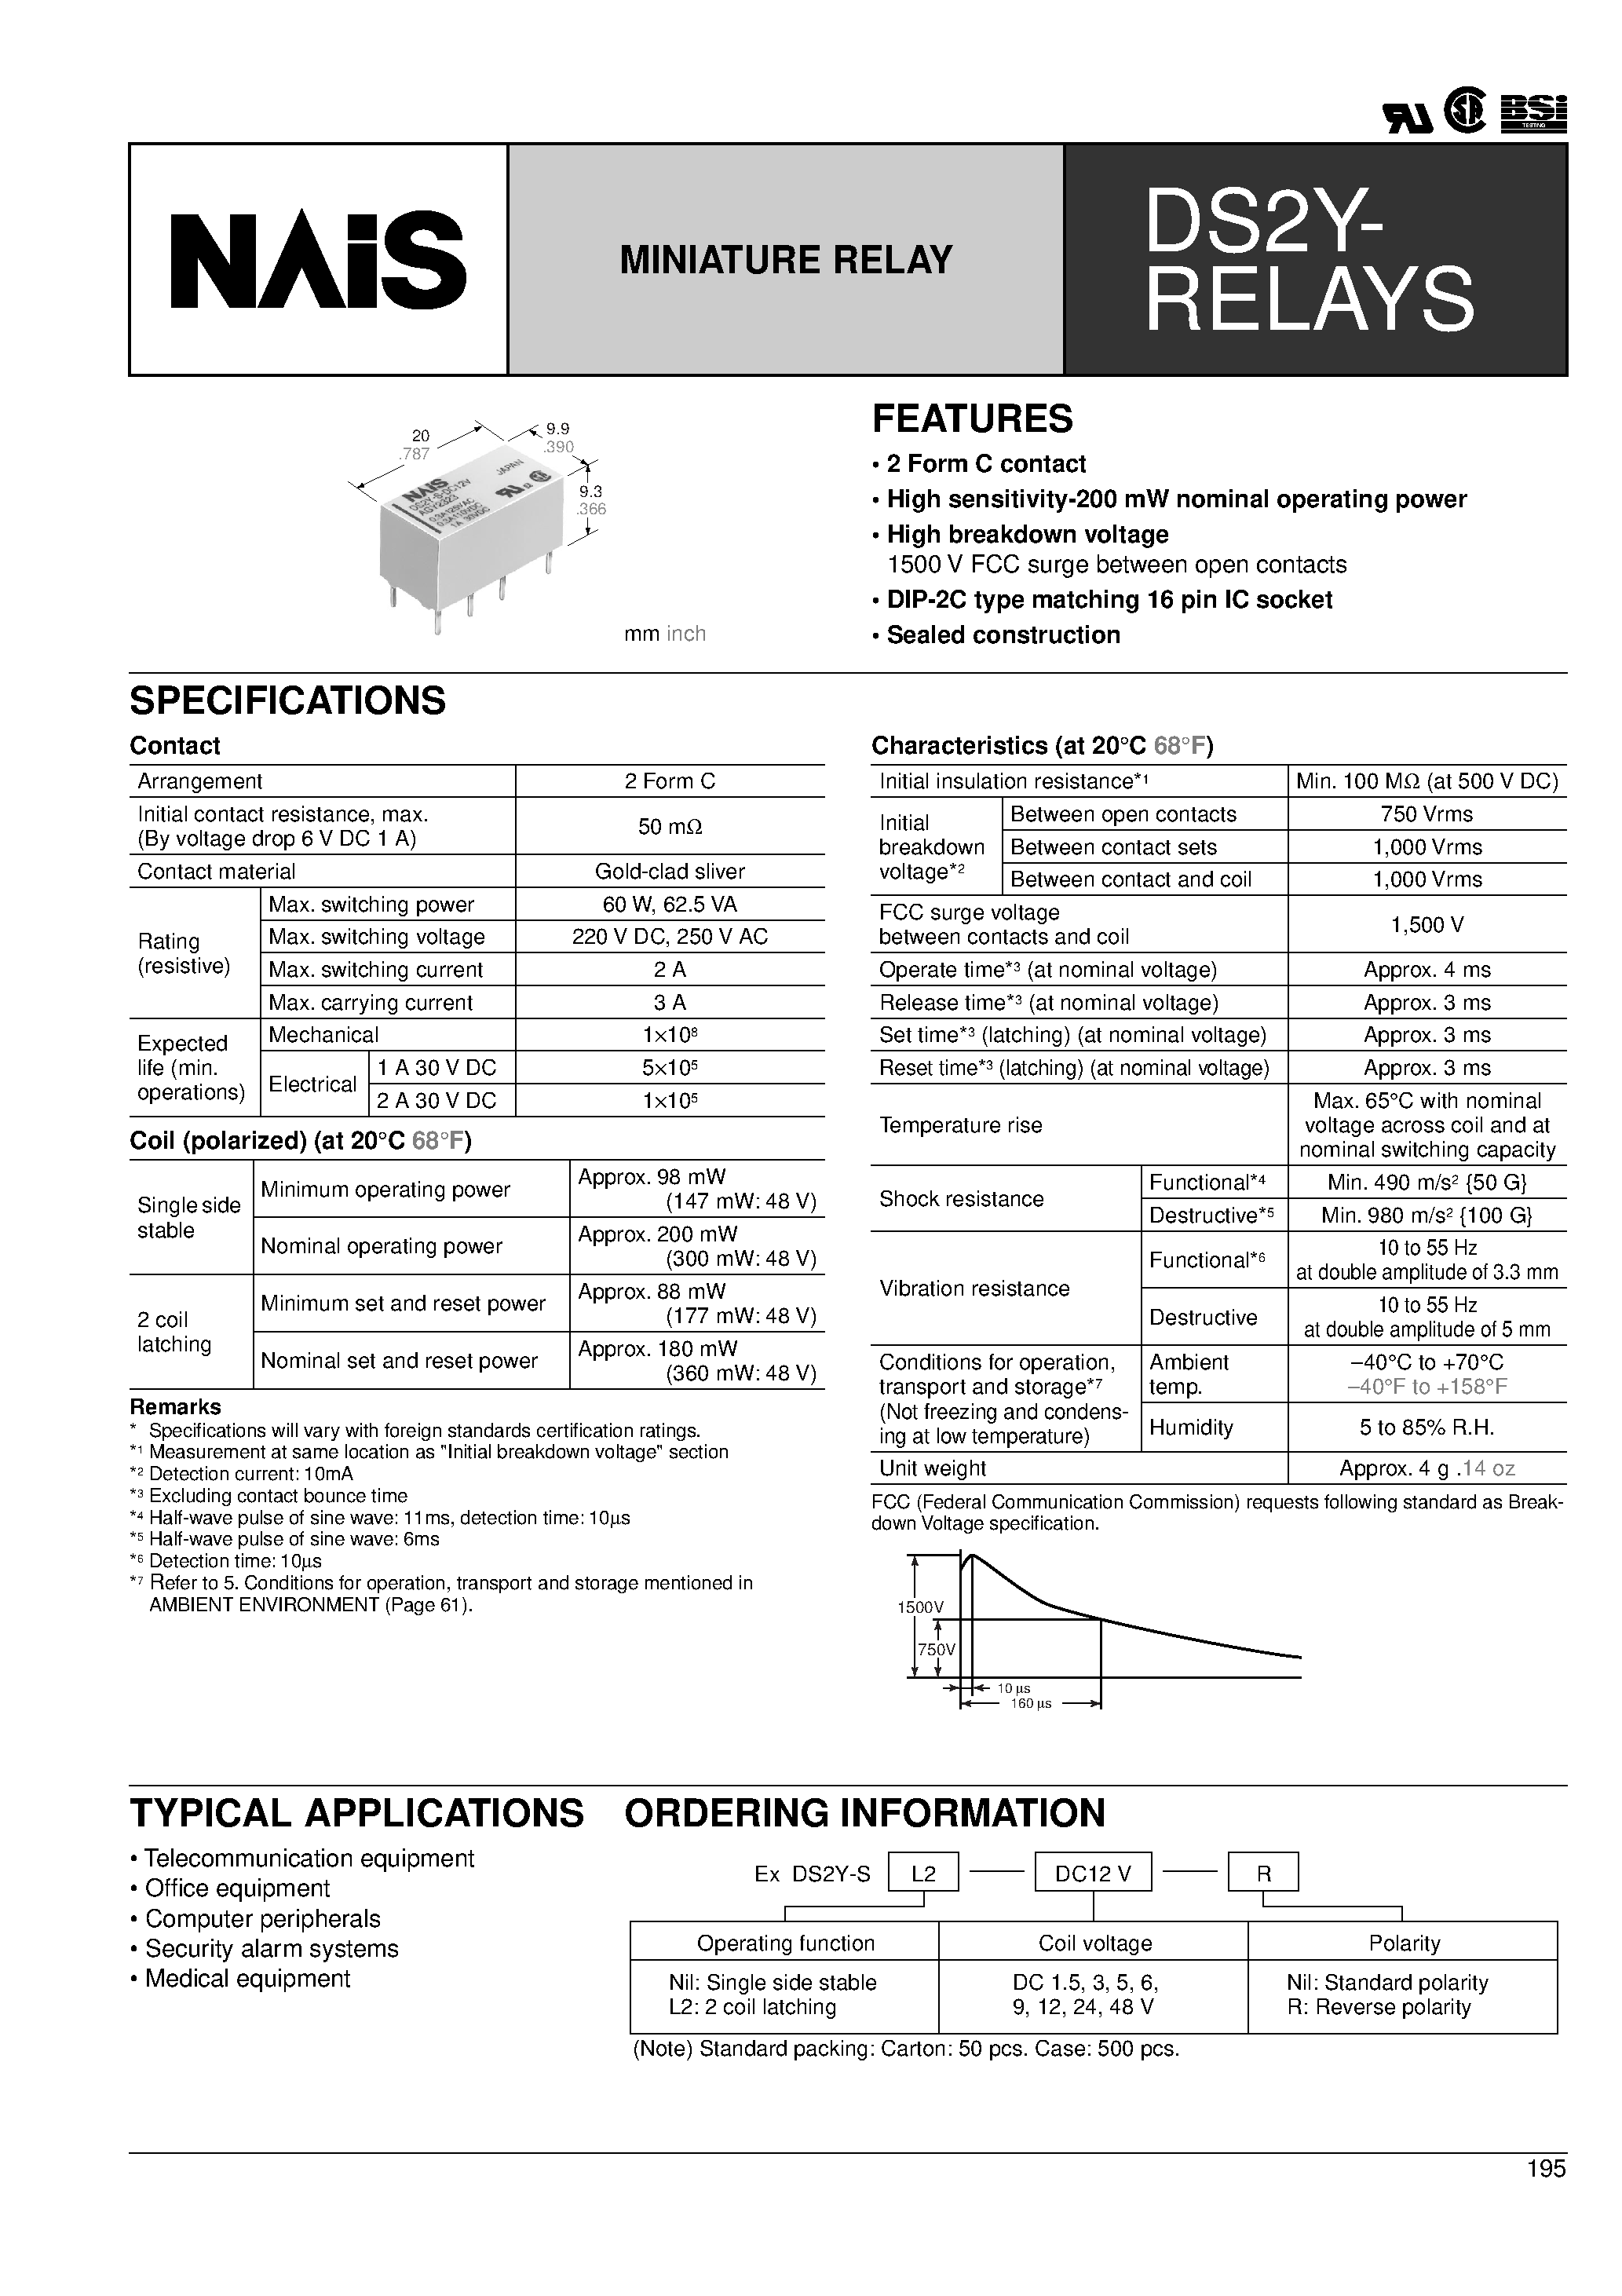 Datasheet DS2Y-SL2-DC12V - 2 Form C contact High sensitivity-200 mW nominal operating power page 1